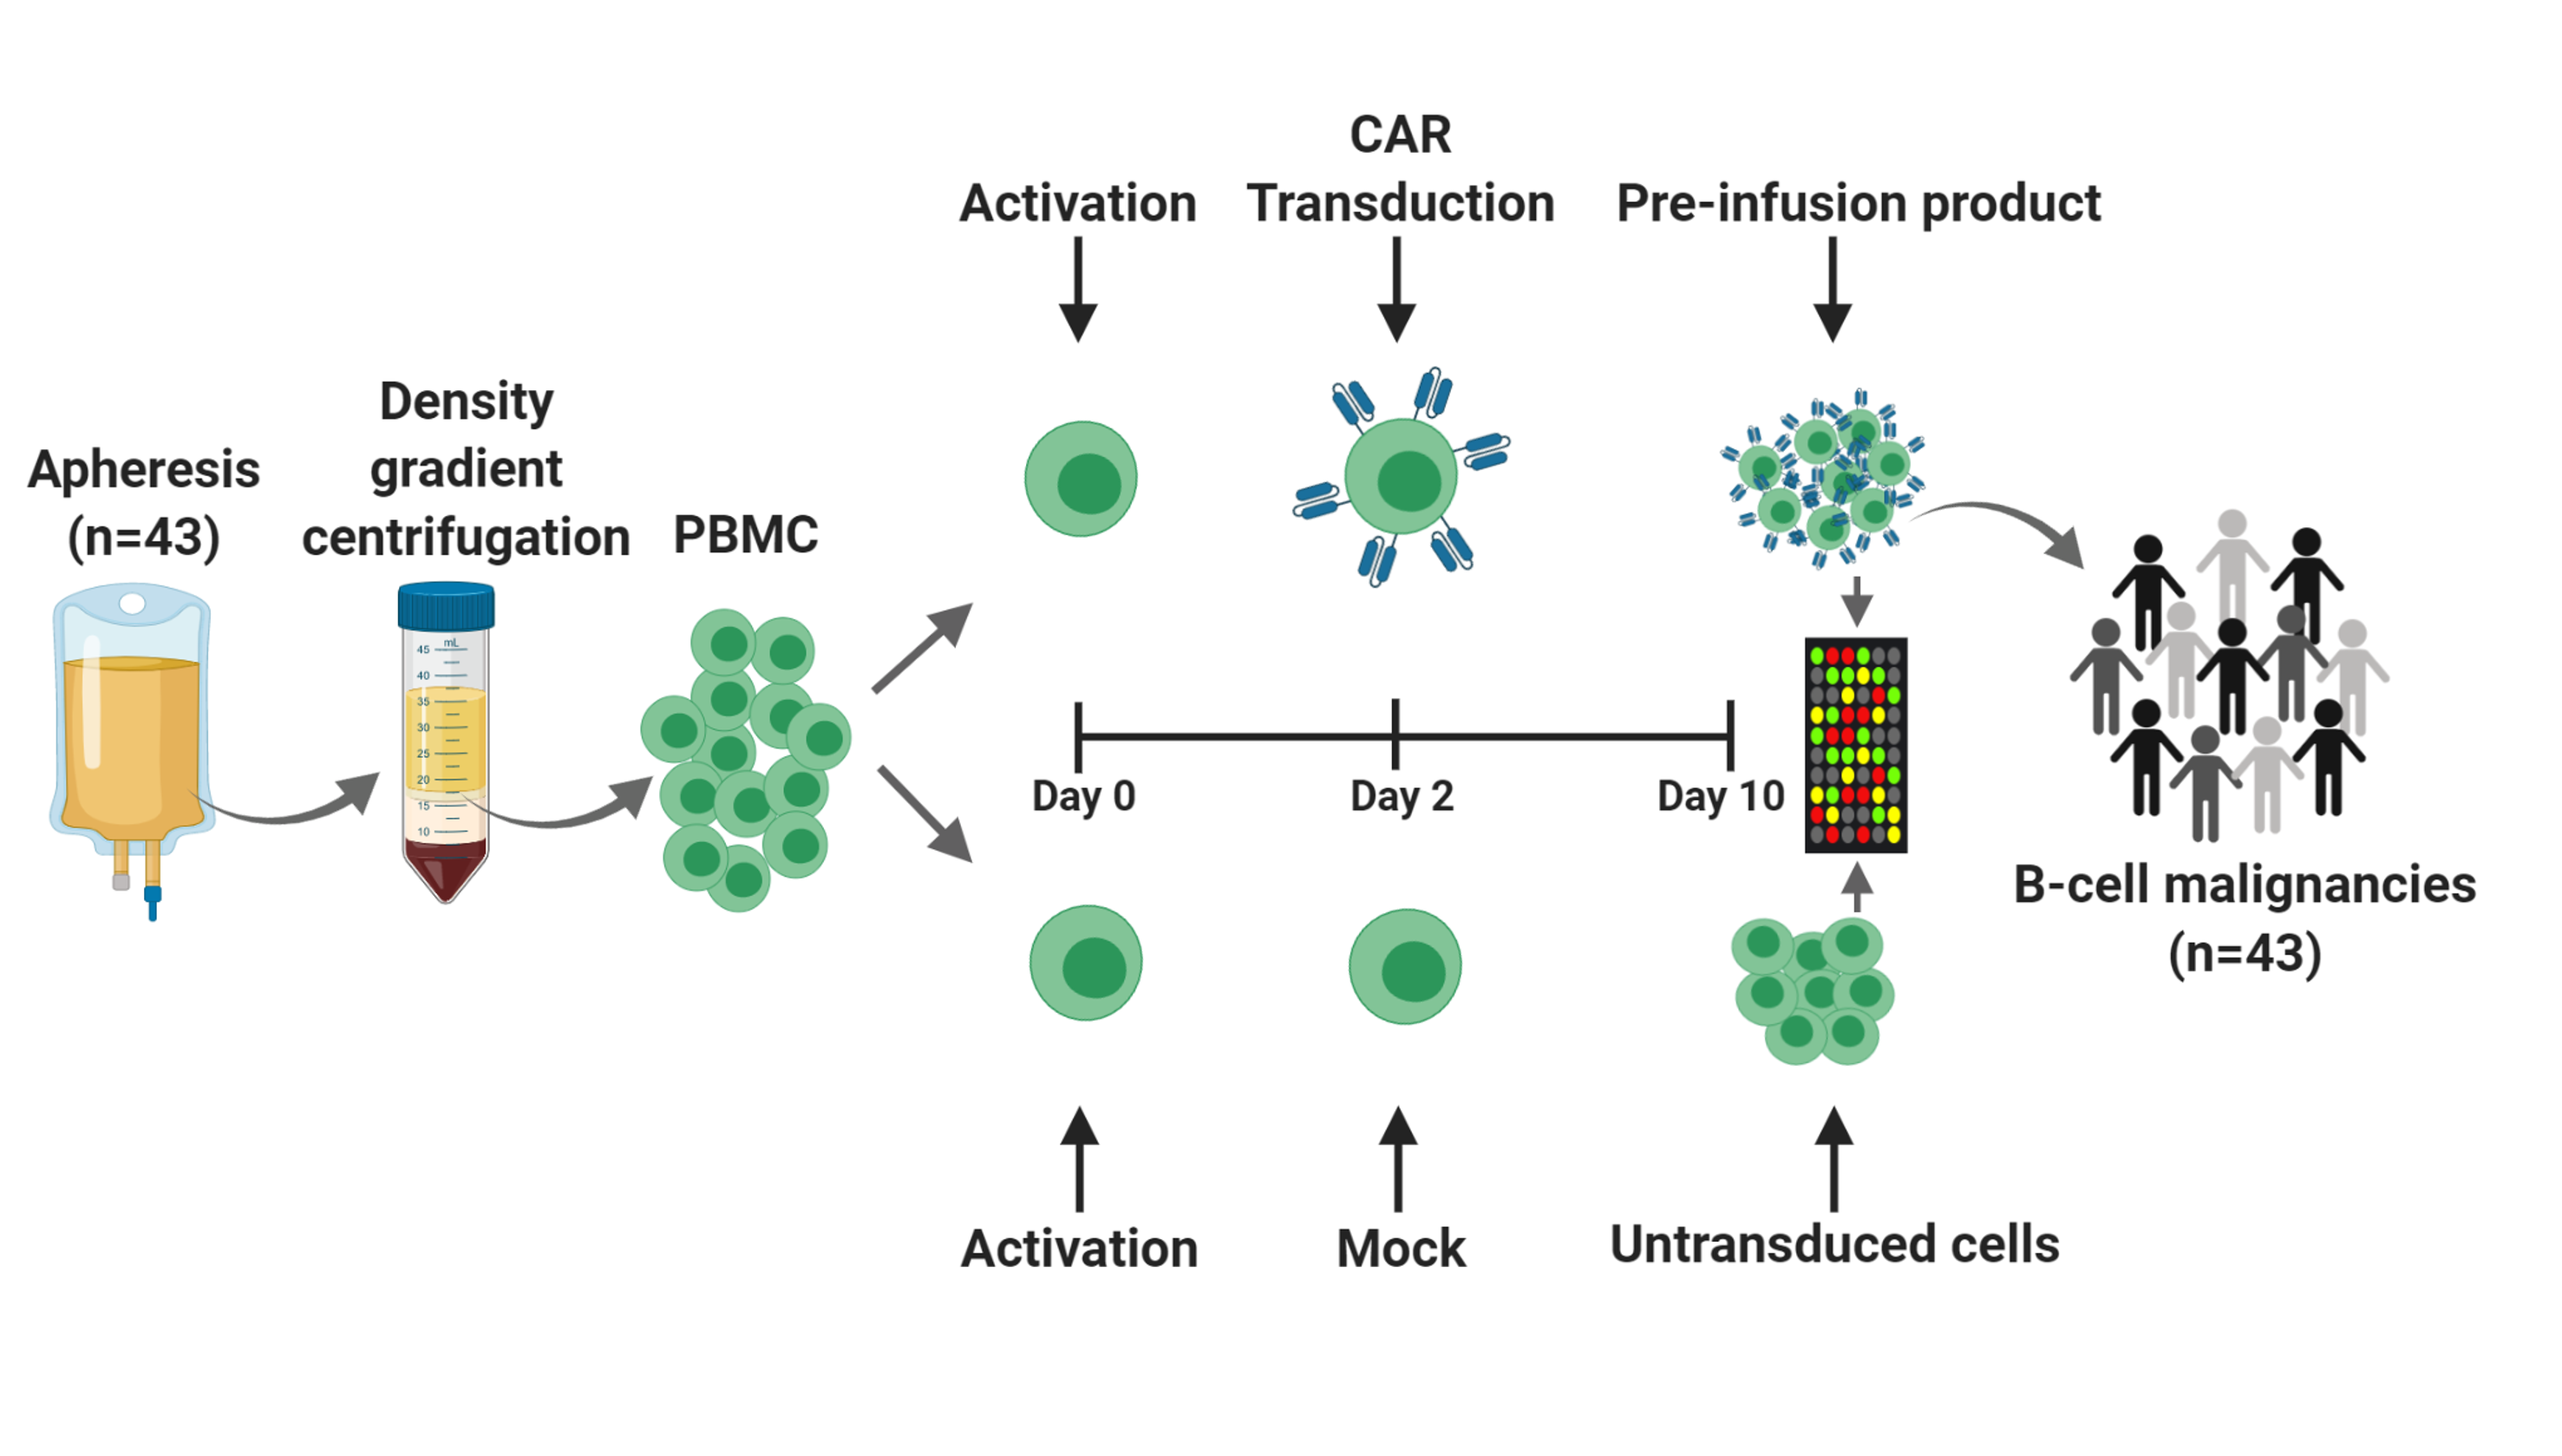 EPICART DNA methylation kit for the prediction of the response to CAR T-cell therapy.